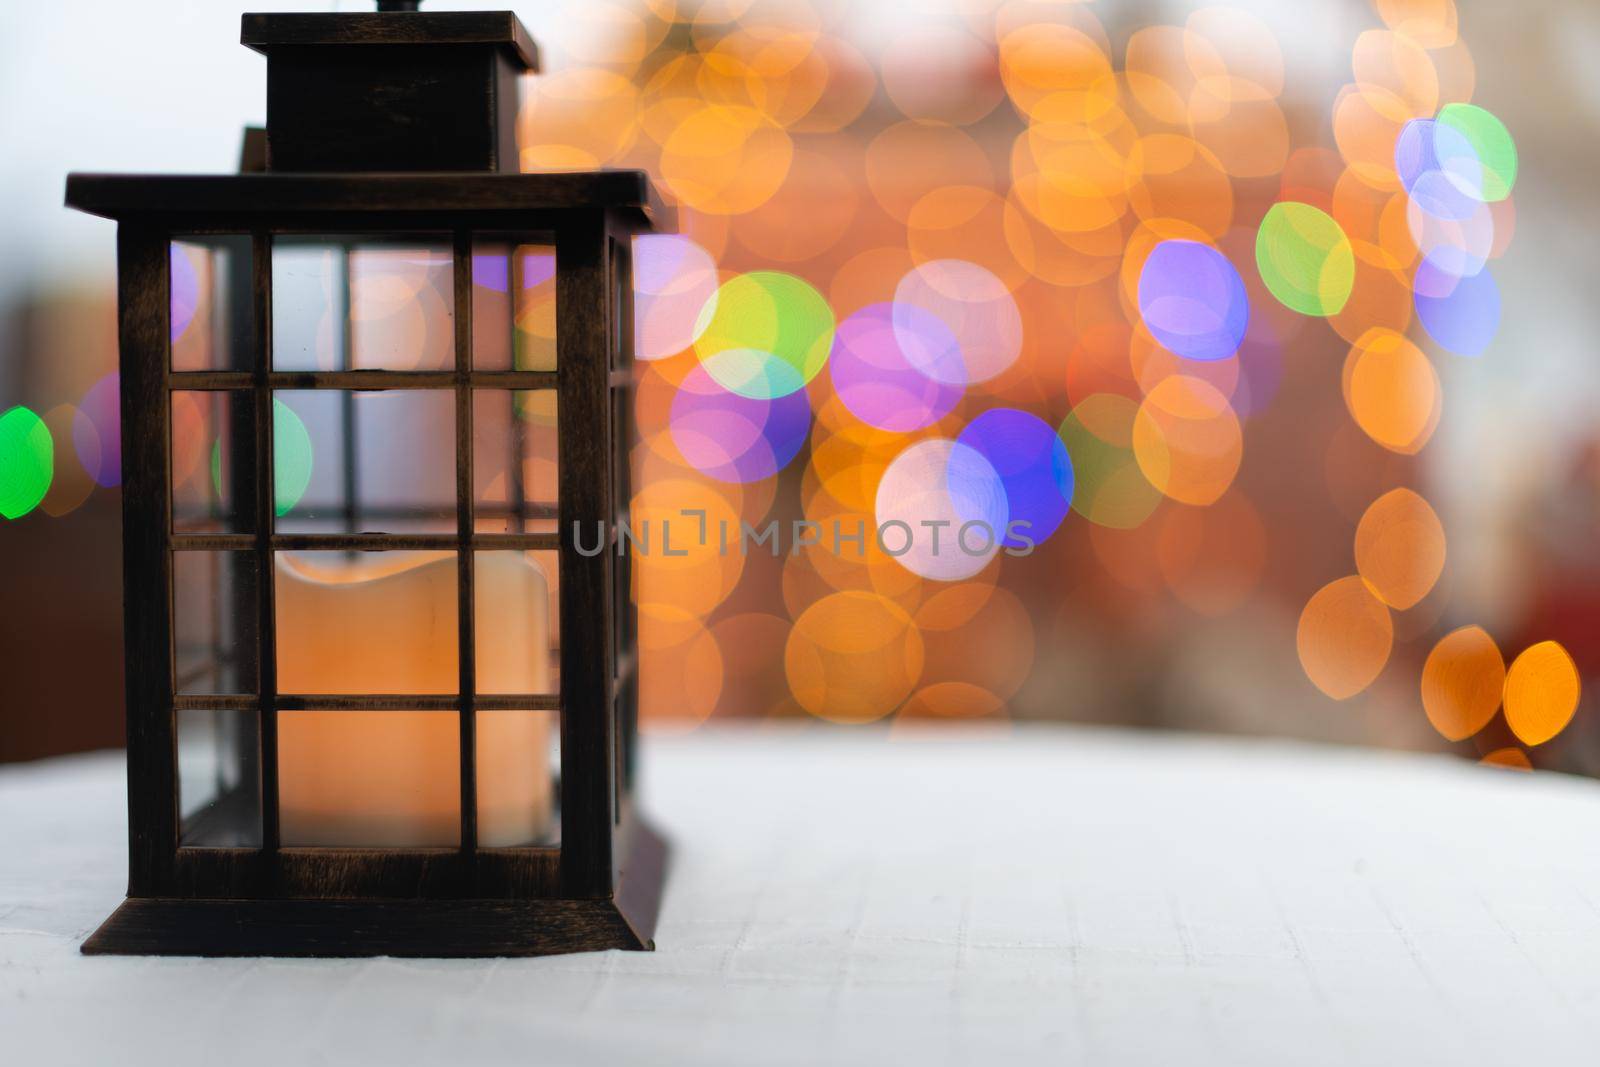 Rectangular old hand lantern with a glowing candle in the center. In the distance a blurred background created from the bokeh of glowing Christmas tree lights